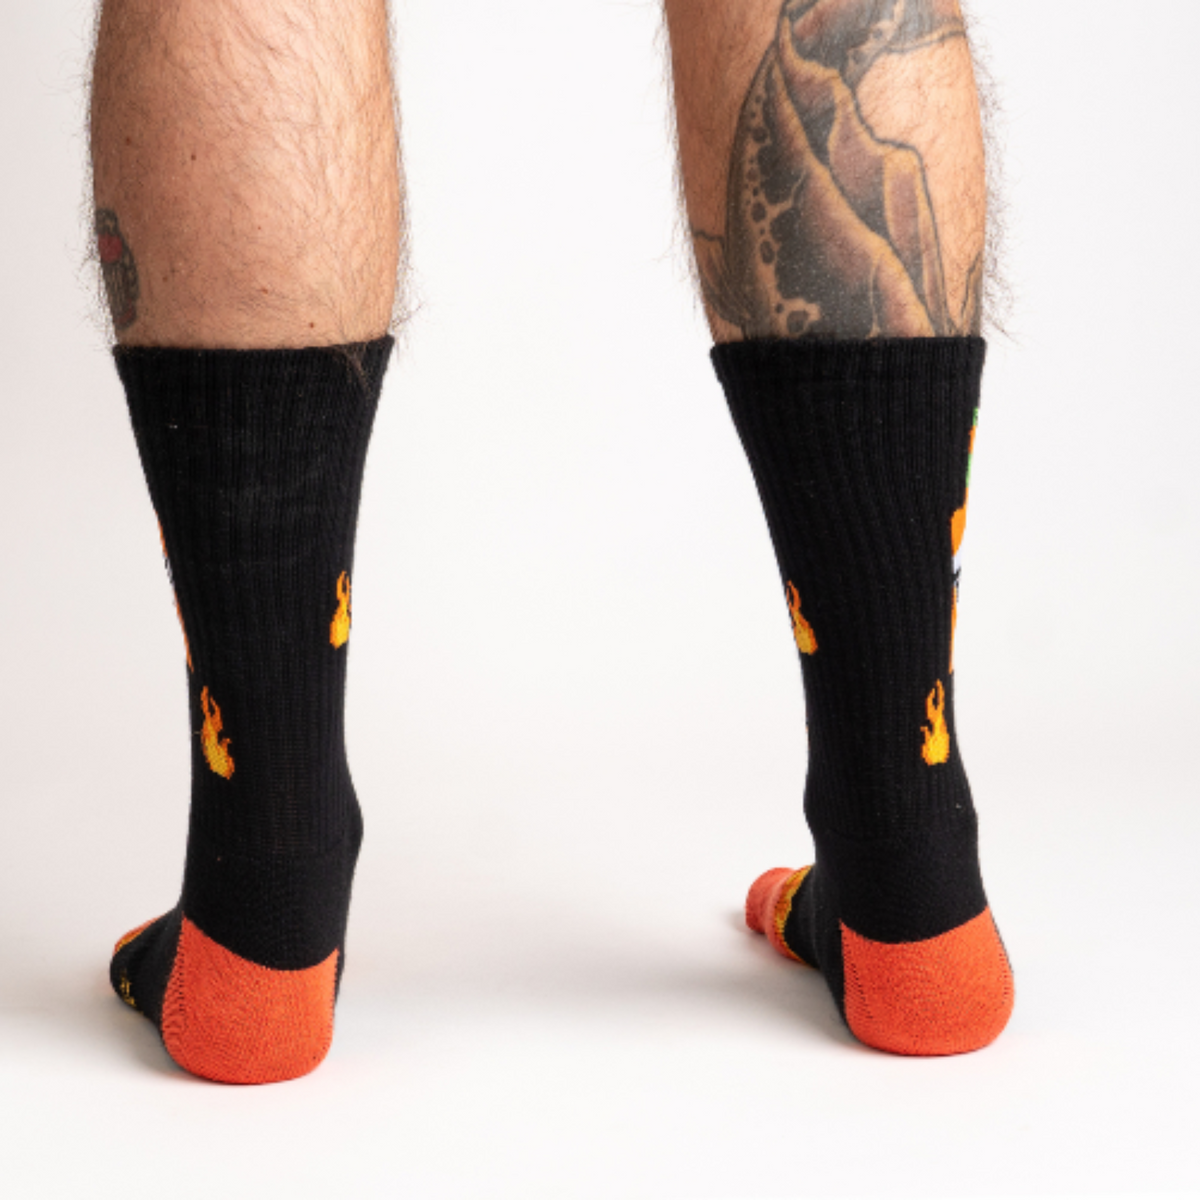 Sock It To Me Fire athletic crew men&#39;s sock featuring black socks with an image of flames and hot sauce bottle. Socks shown on model from behind.. 